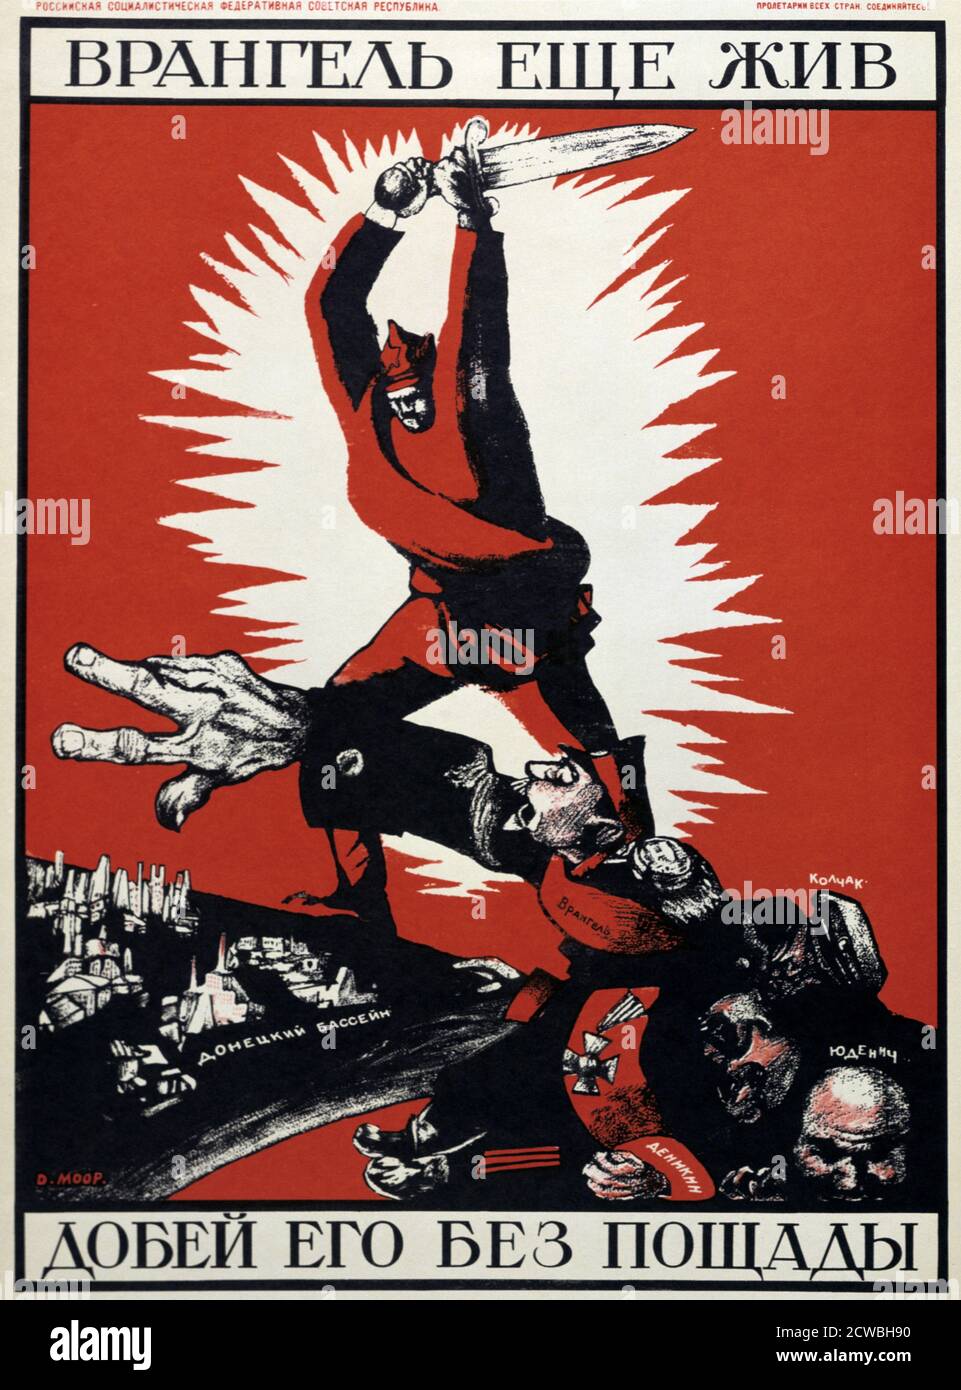 Soviet political poster by Dmitriy Stakhievich Moor, 1920. Stock Photo